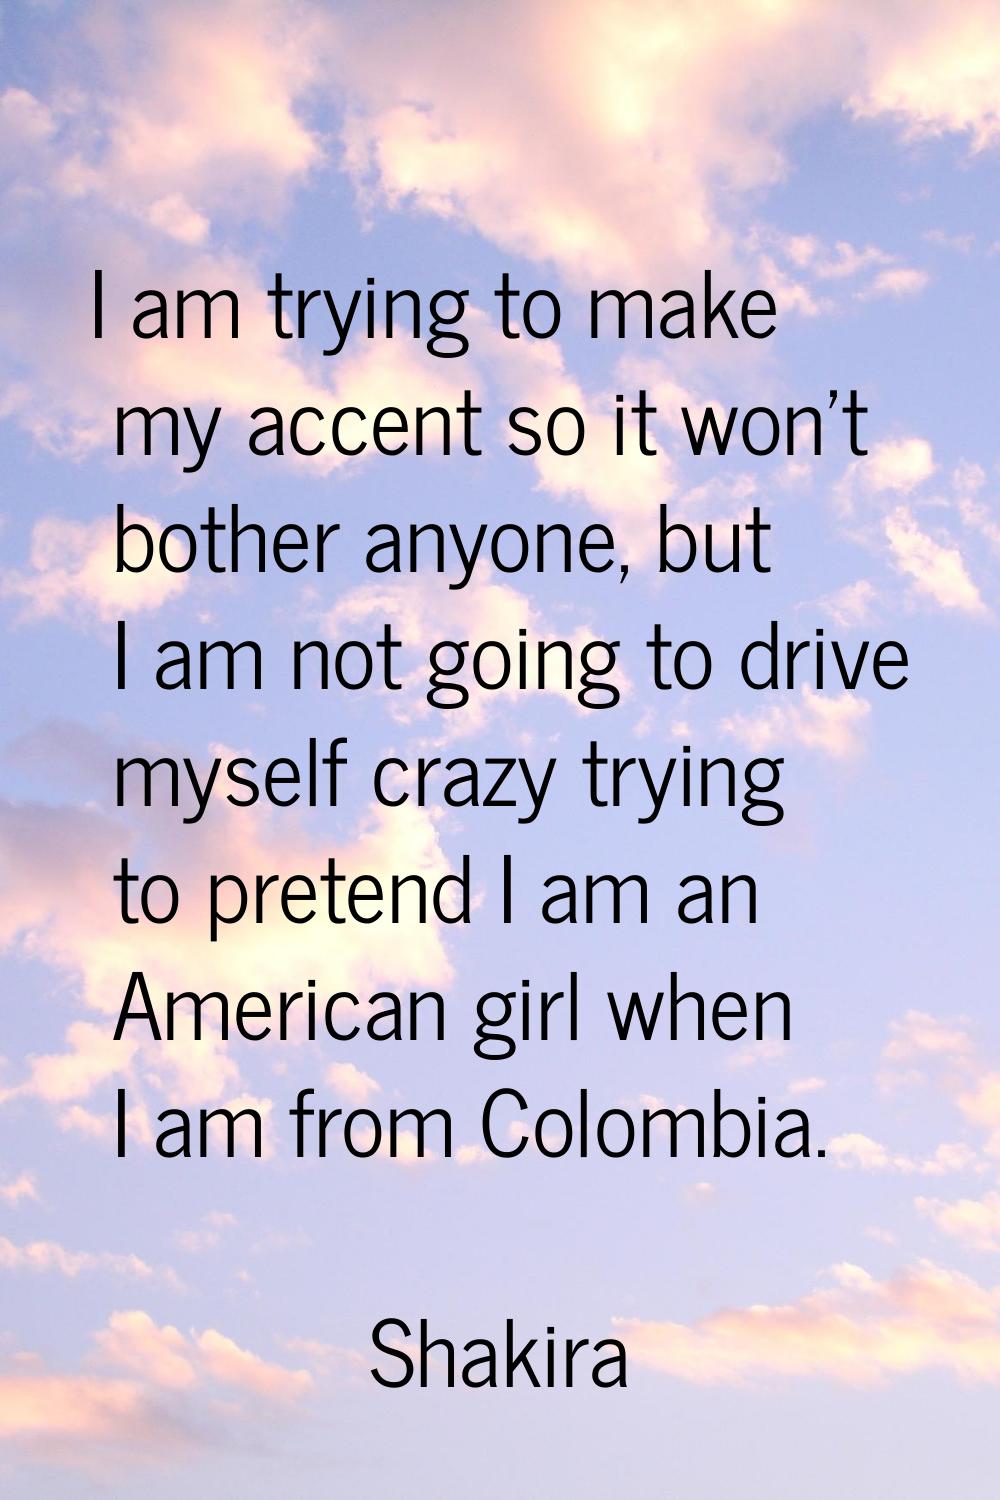 I am trying to make my accent so it won't bother anyone, but I am not going to drive myself crazy t